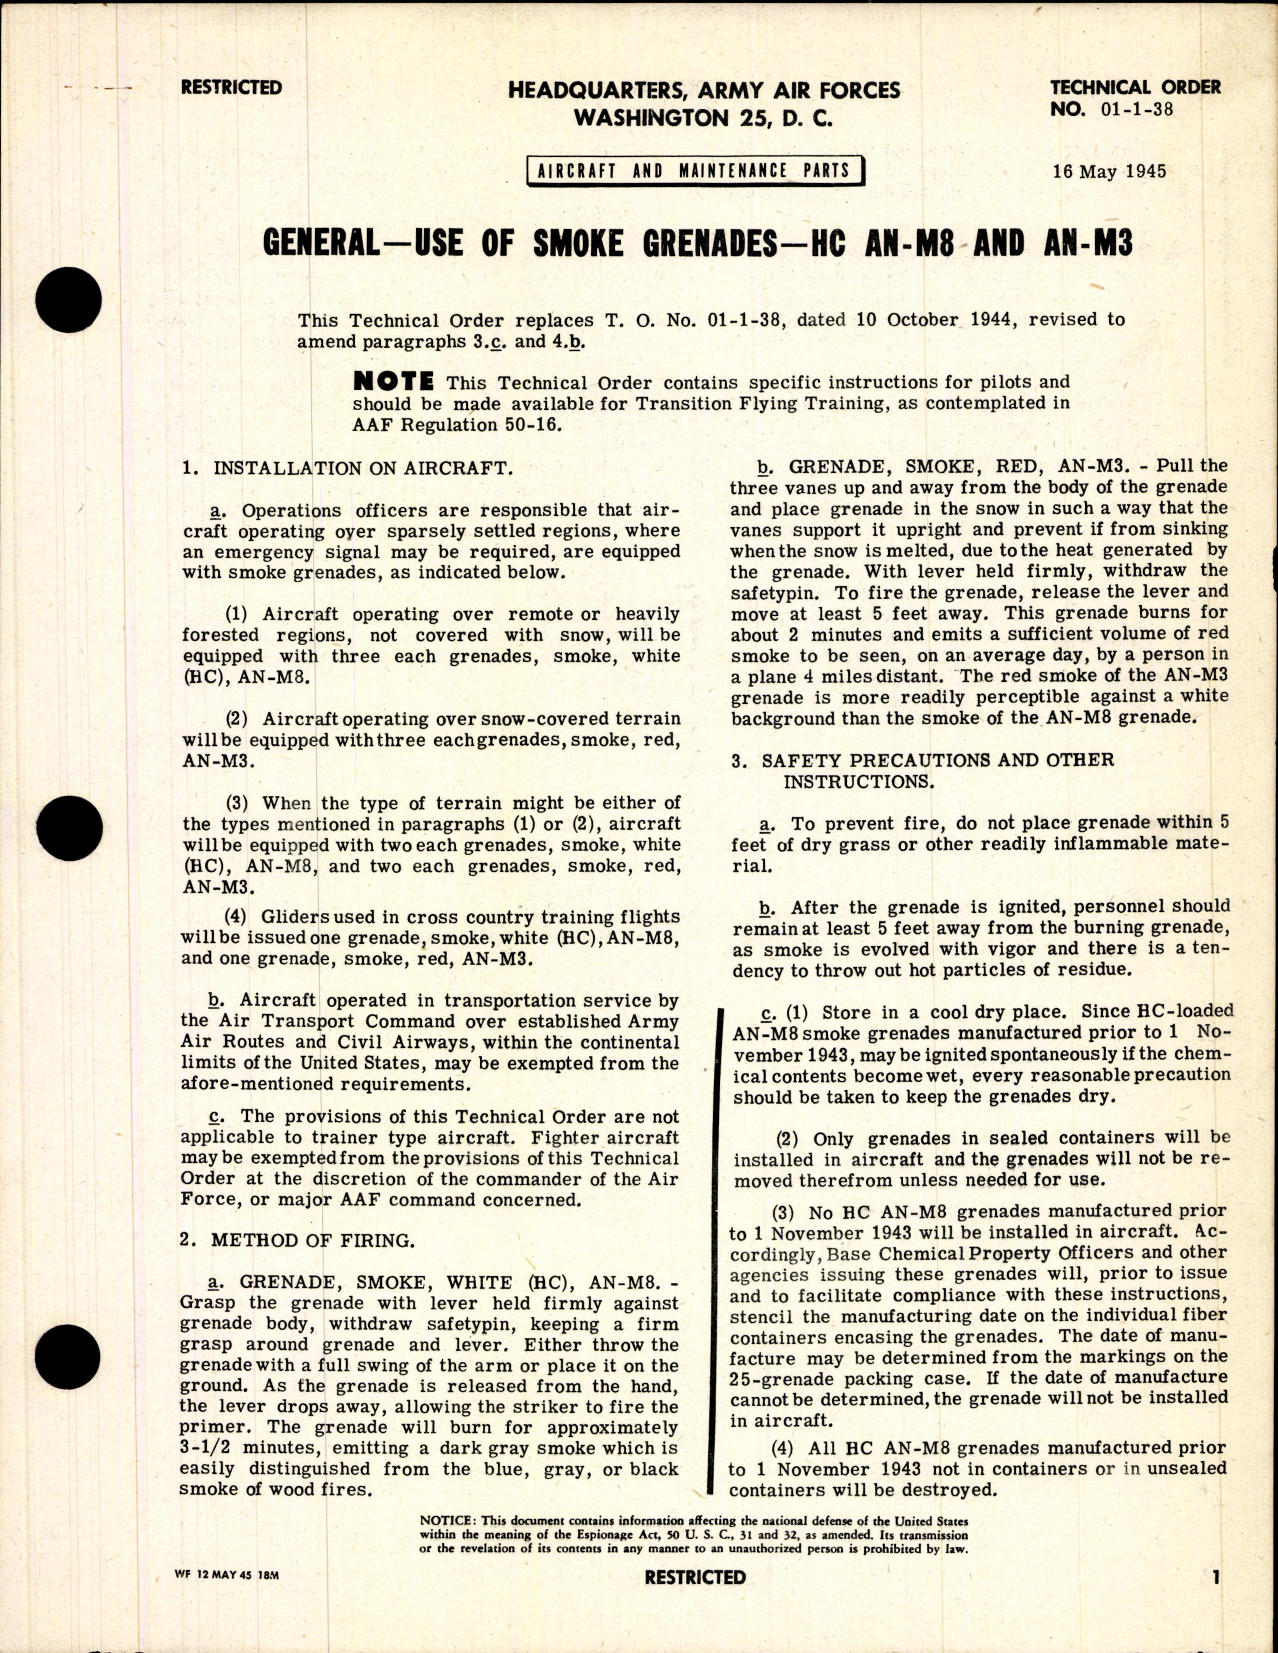 Sample page 1 from AirCorps Library document: Aircraft and Maintenance Parts for Use of Smoke Grenades HC, AN, M8, and AN-M3